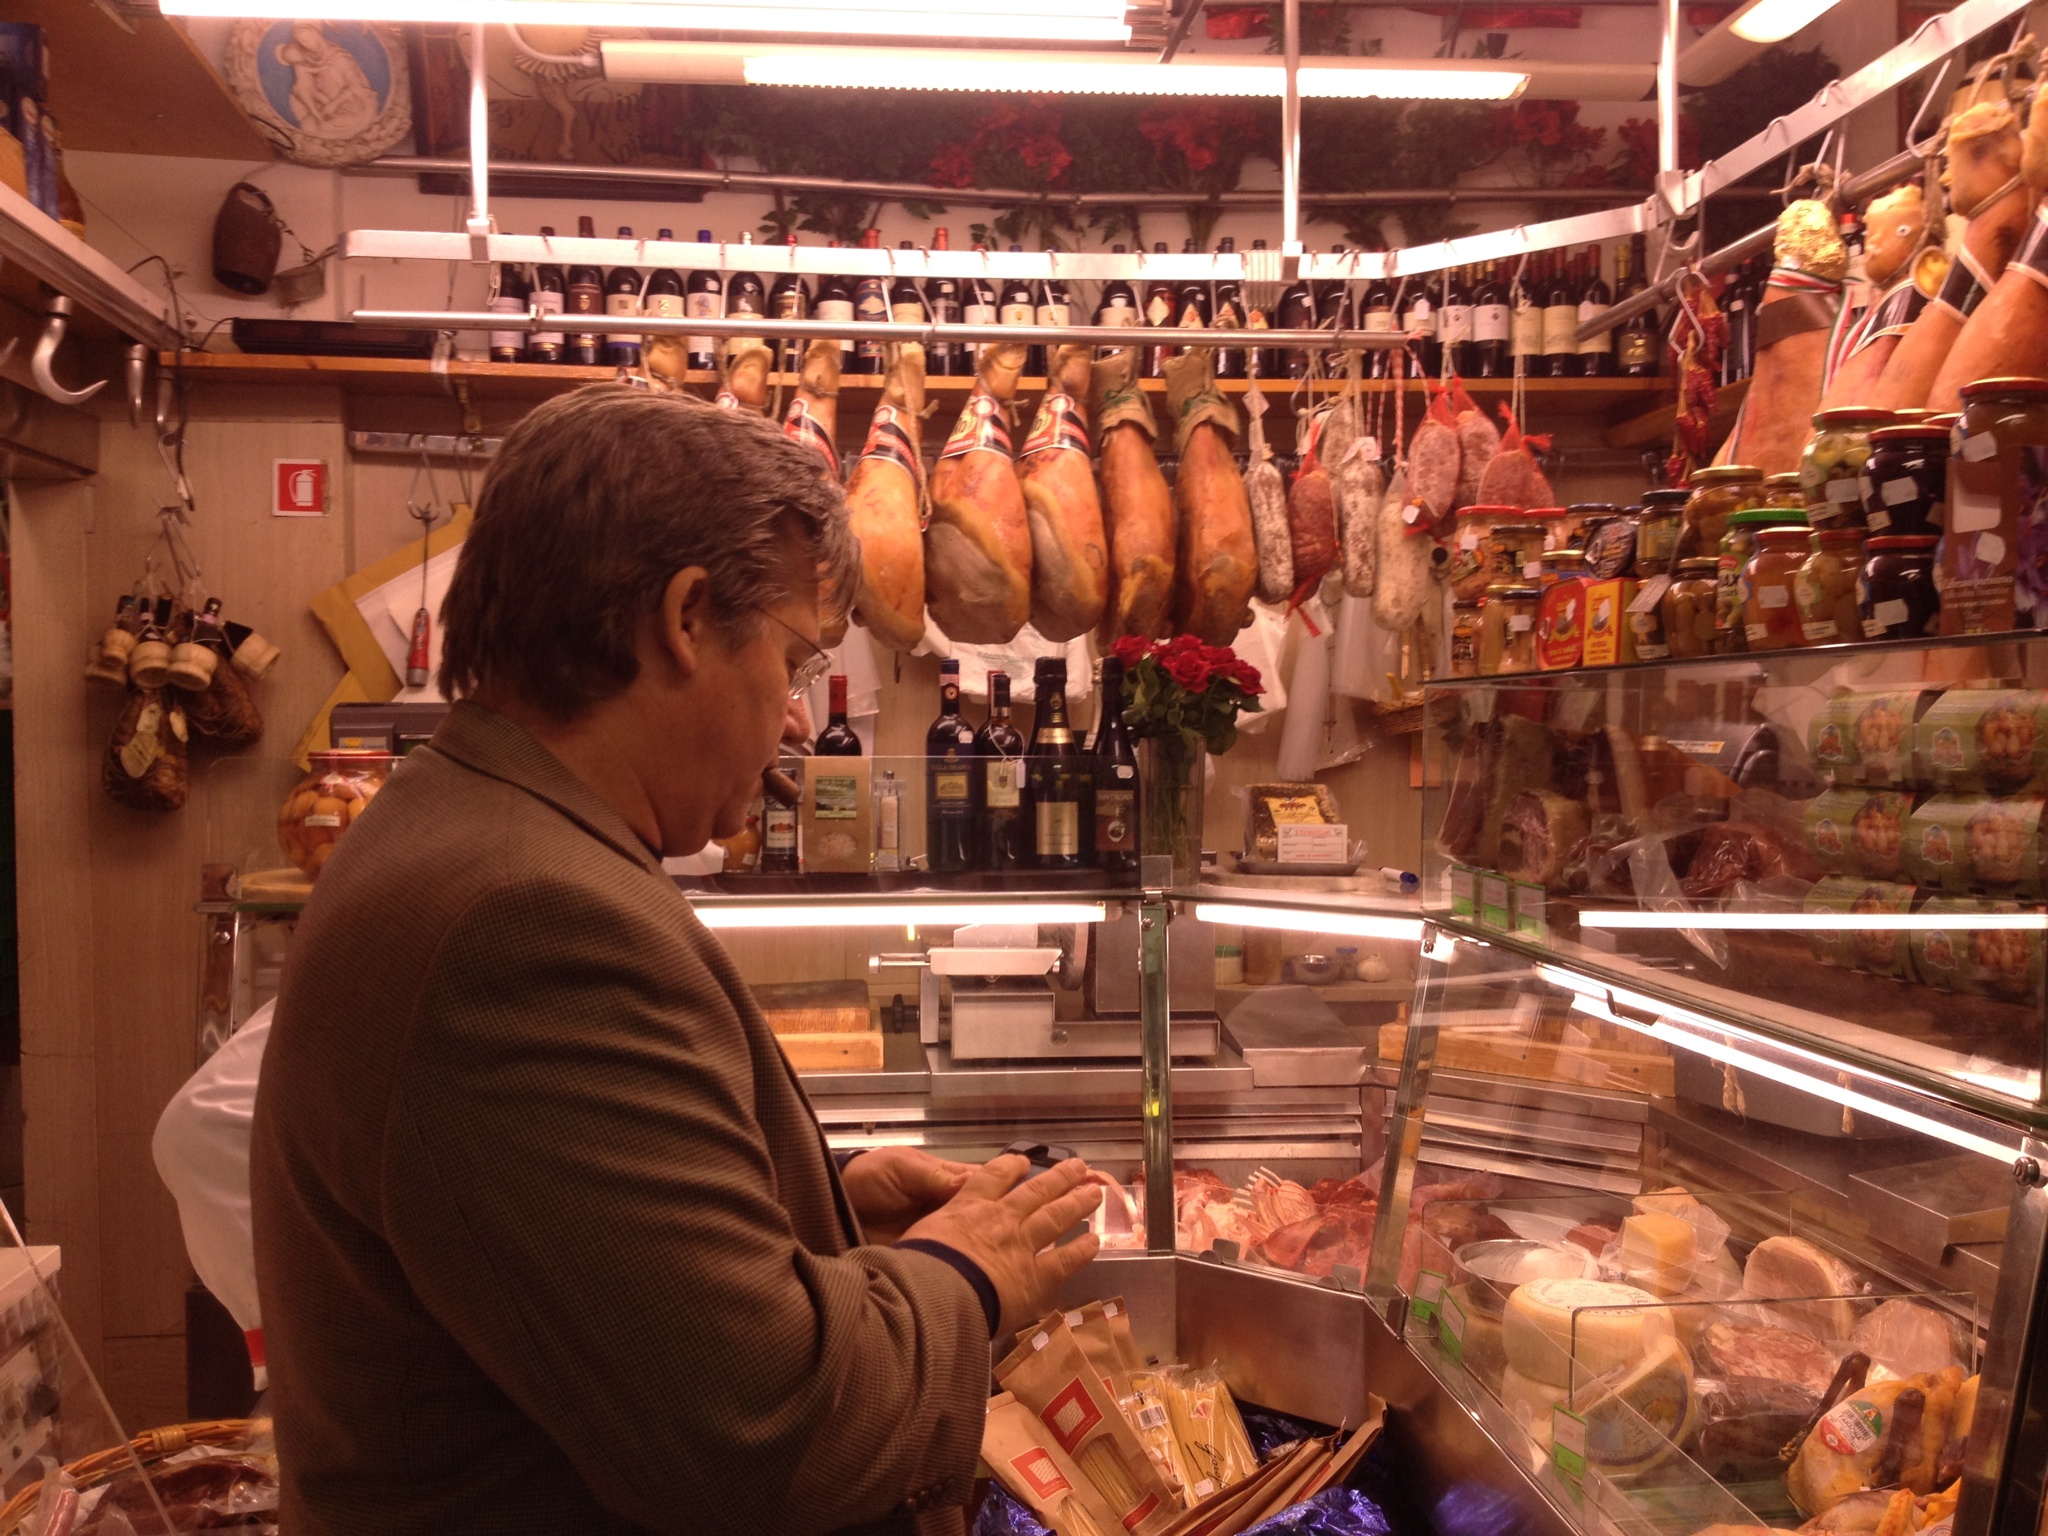 U.K. Culinary Professor Bob Perry visiting with his class at a typical market